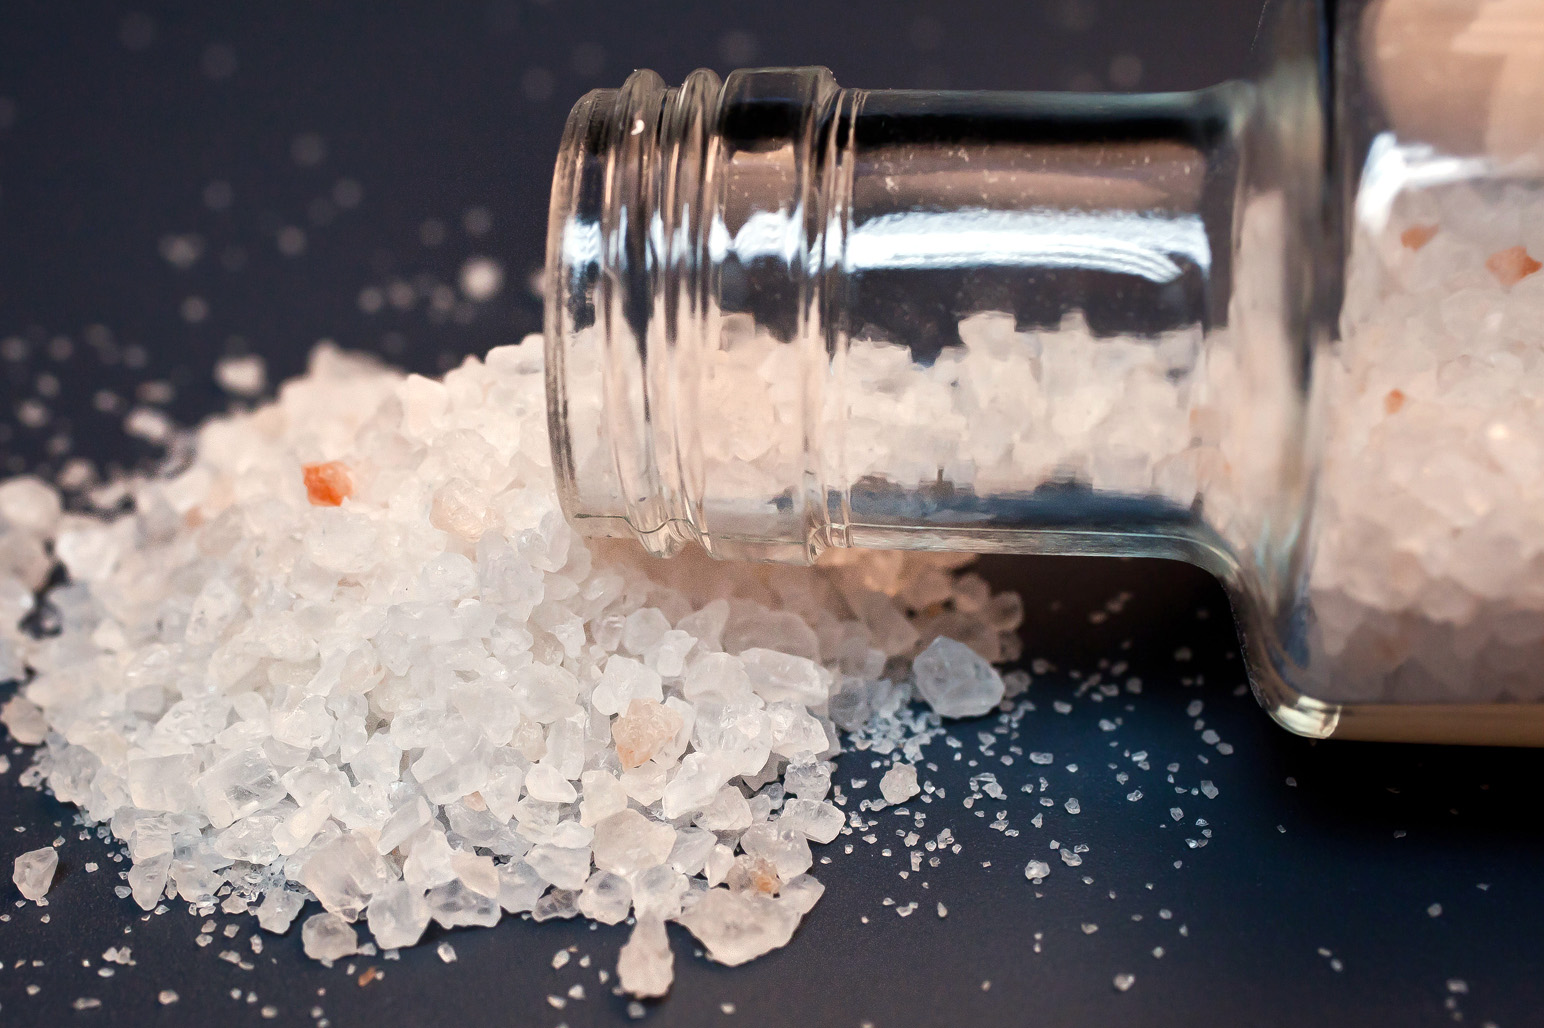 Bath salts, spice abuse discussed